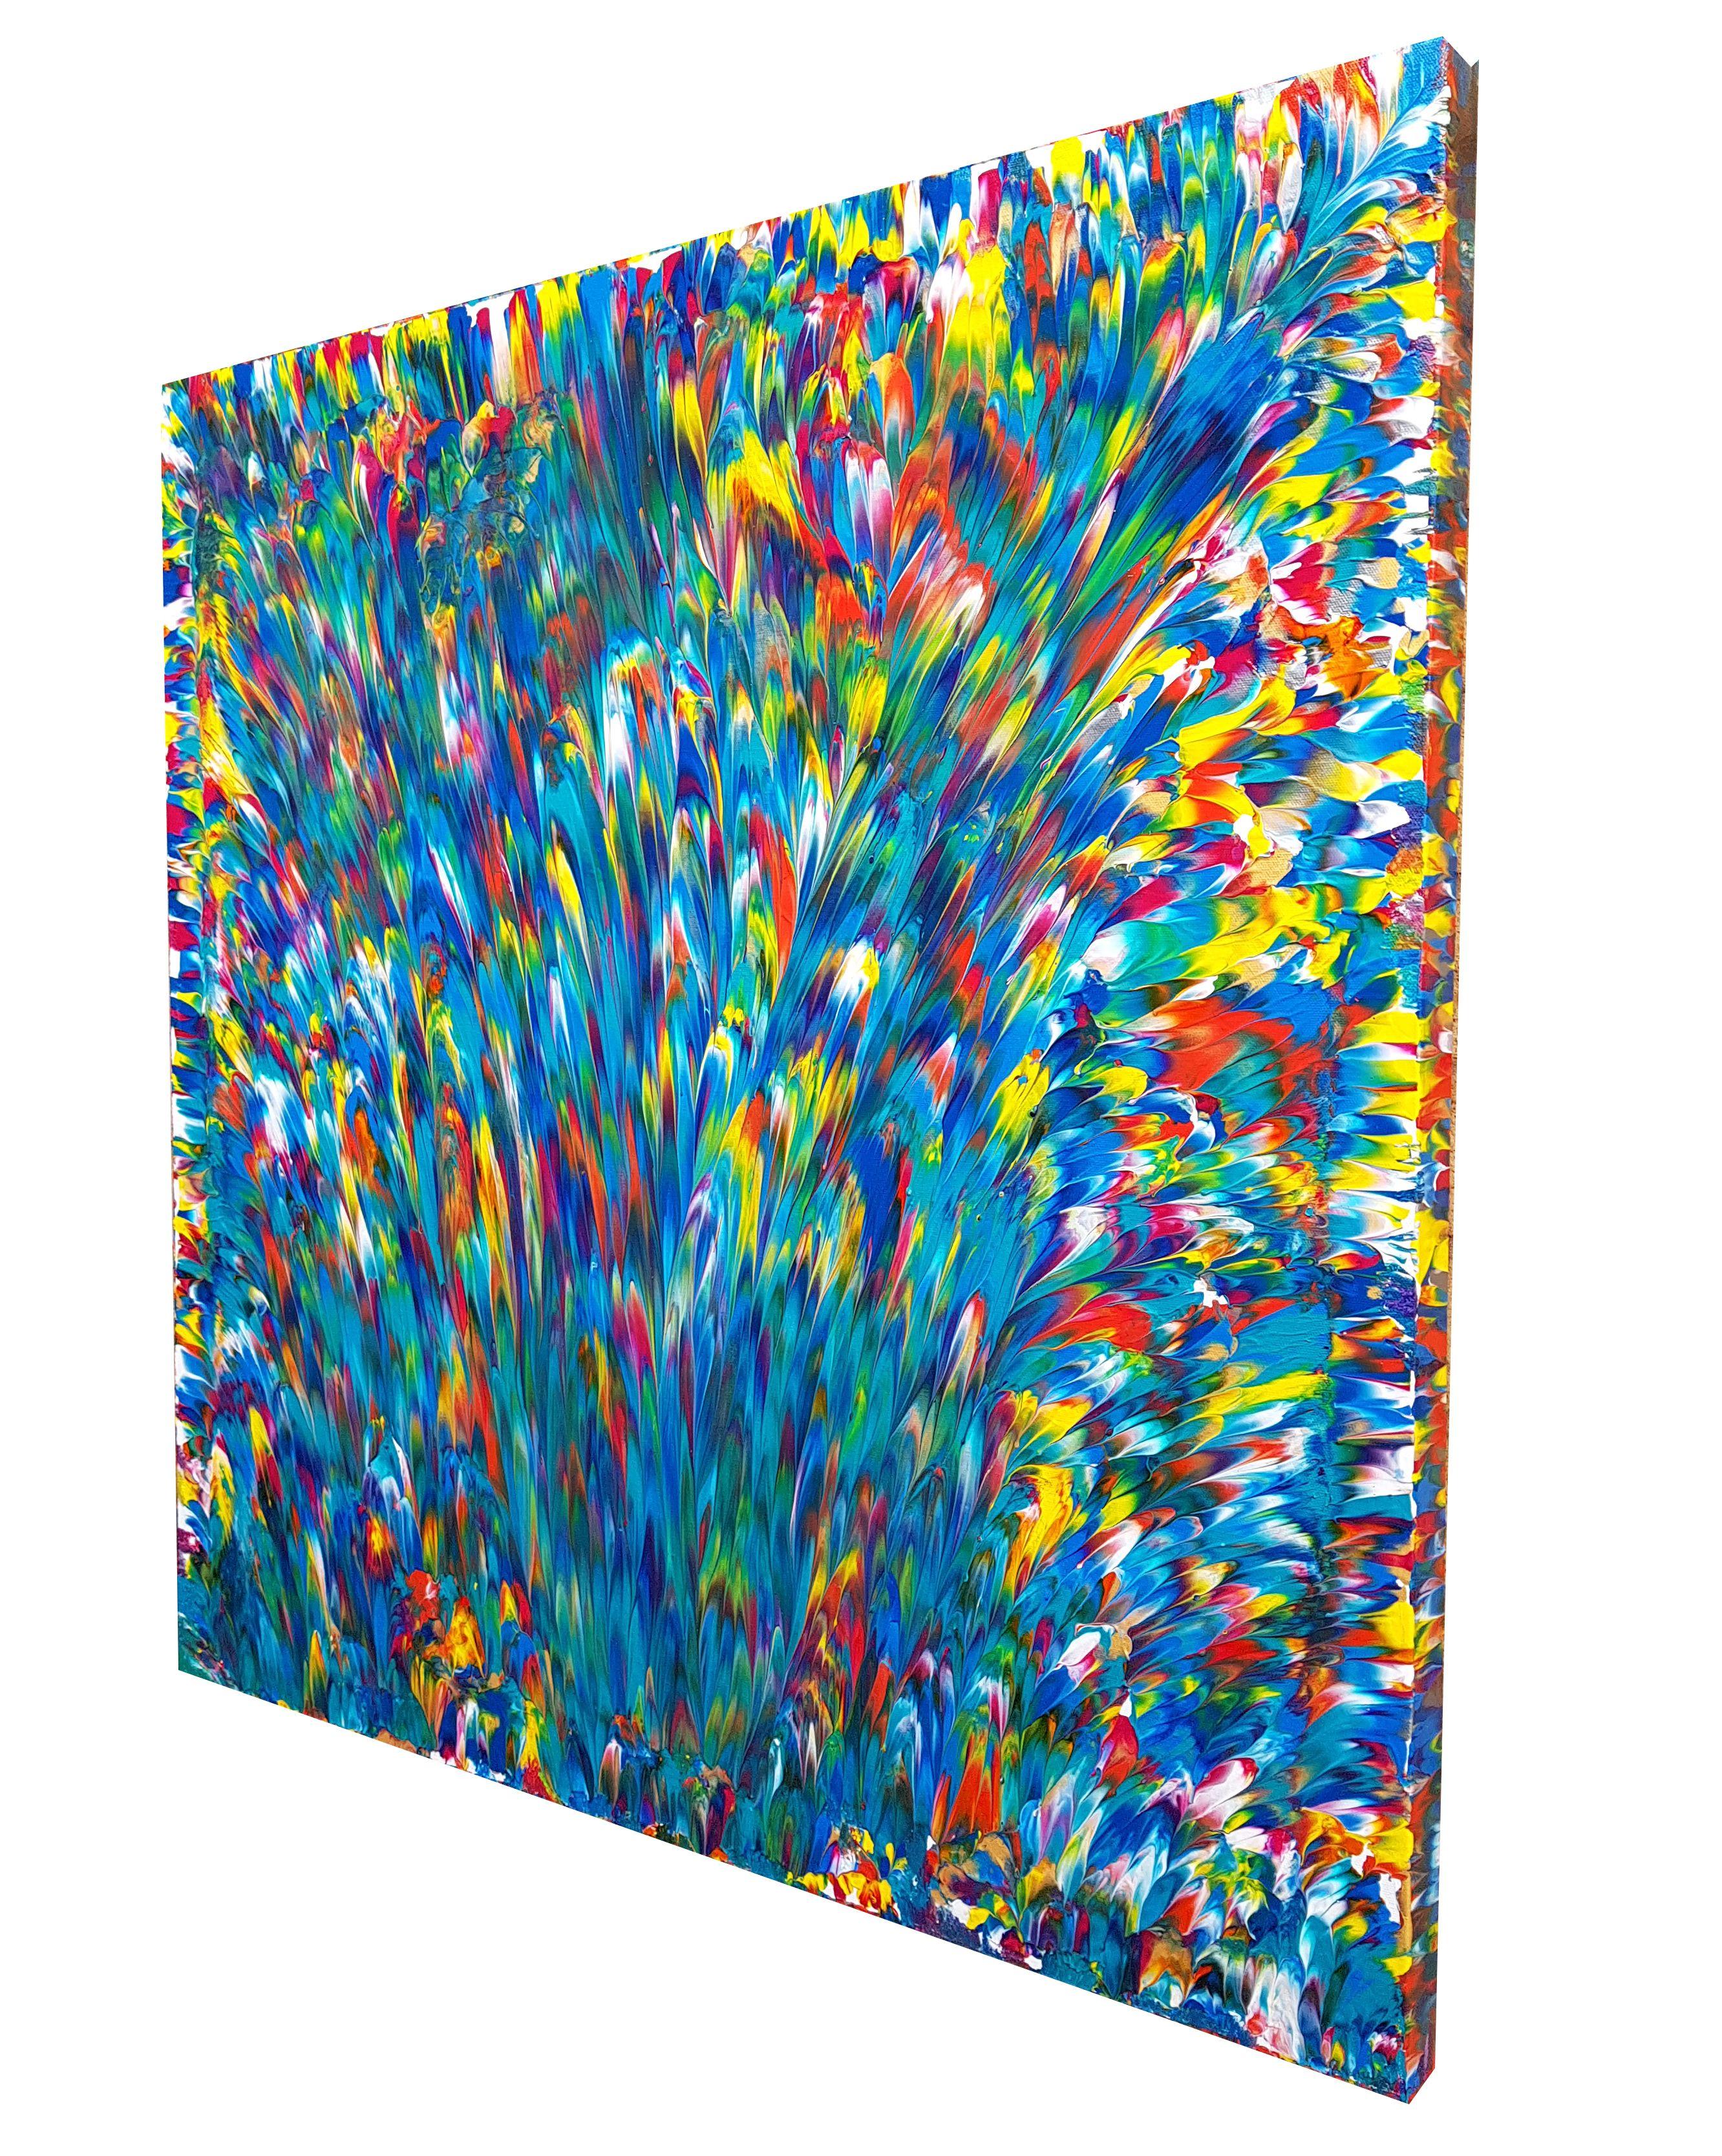 Psychedelic Waterfall No. 2, Painting, Acrylic on Canvas - Blue Abstract Painting by Alexandra Romano